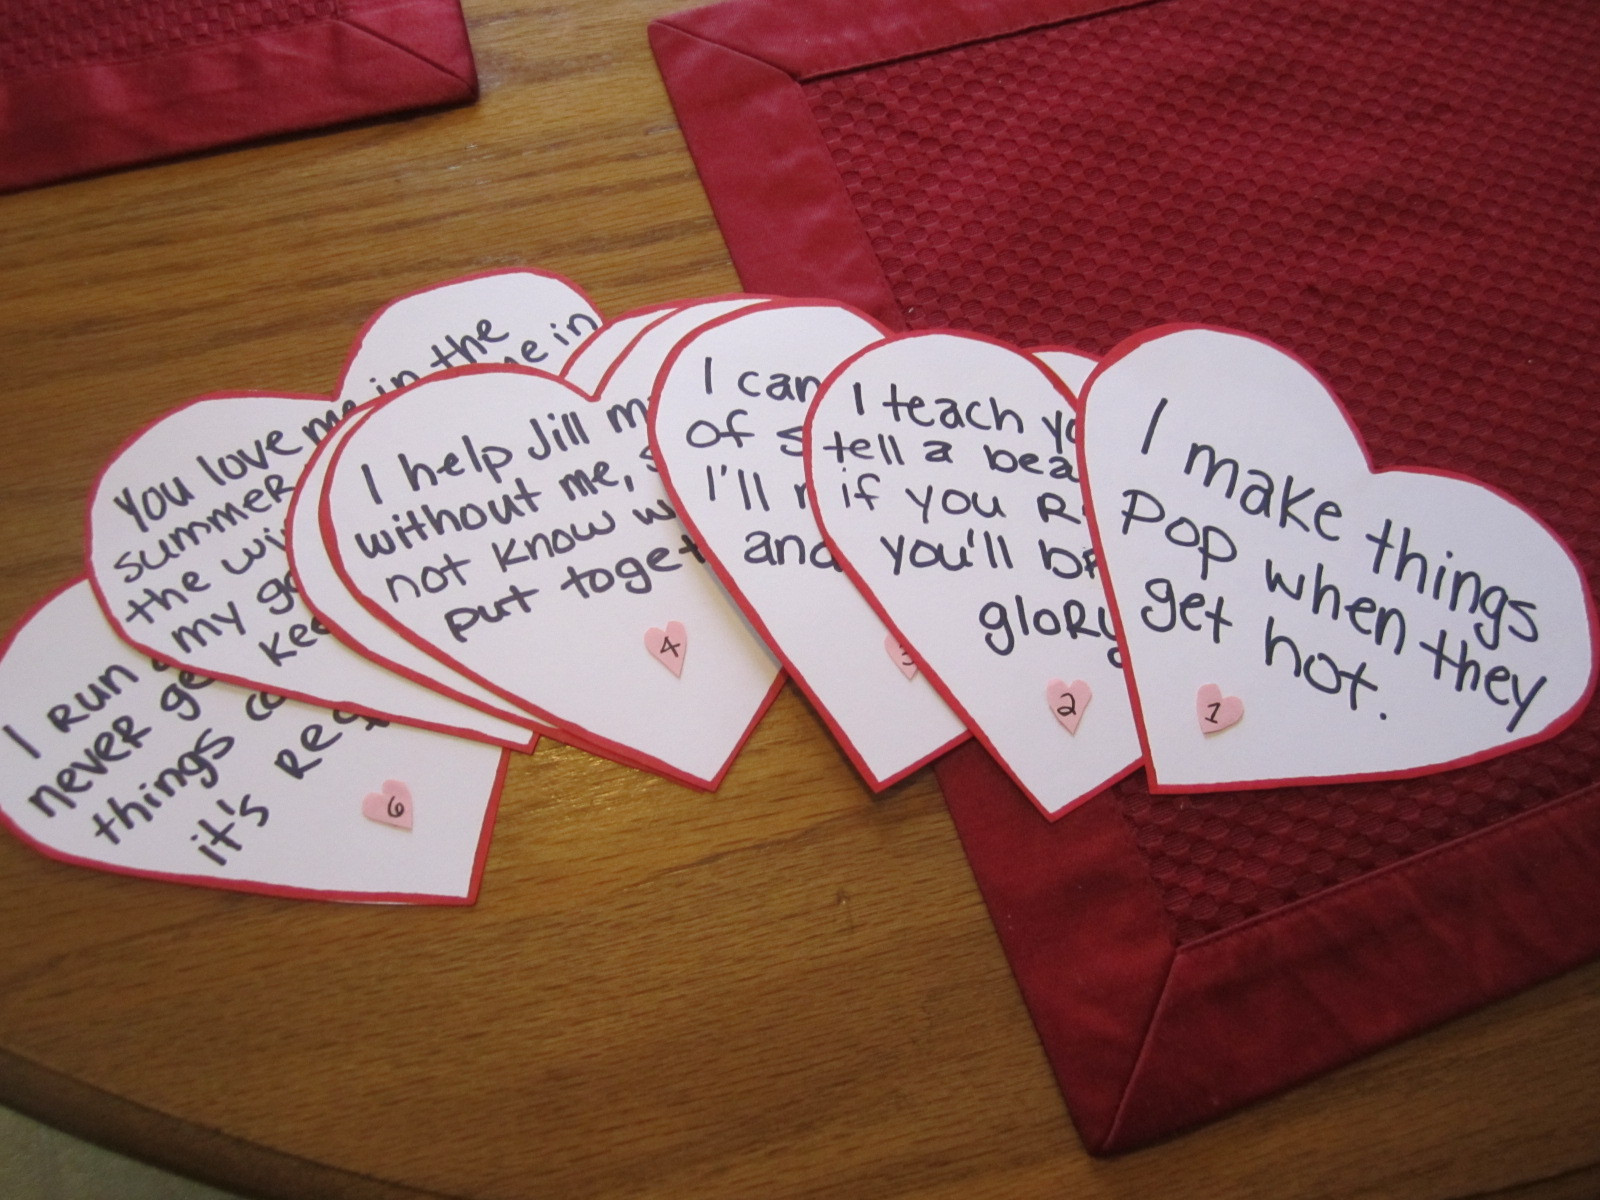 Valentines Creative Gift Ideas
 Ten DIY Valentine’s Day Gifts for him and her